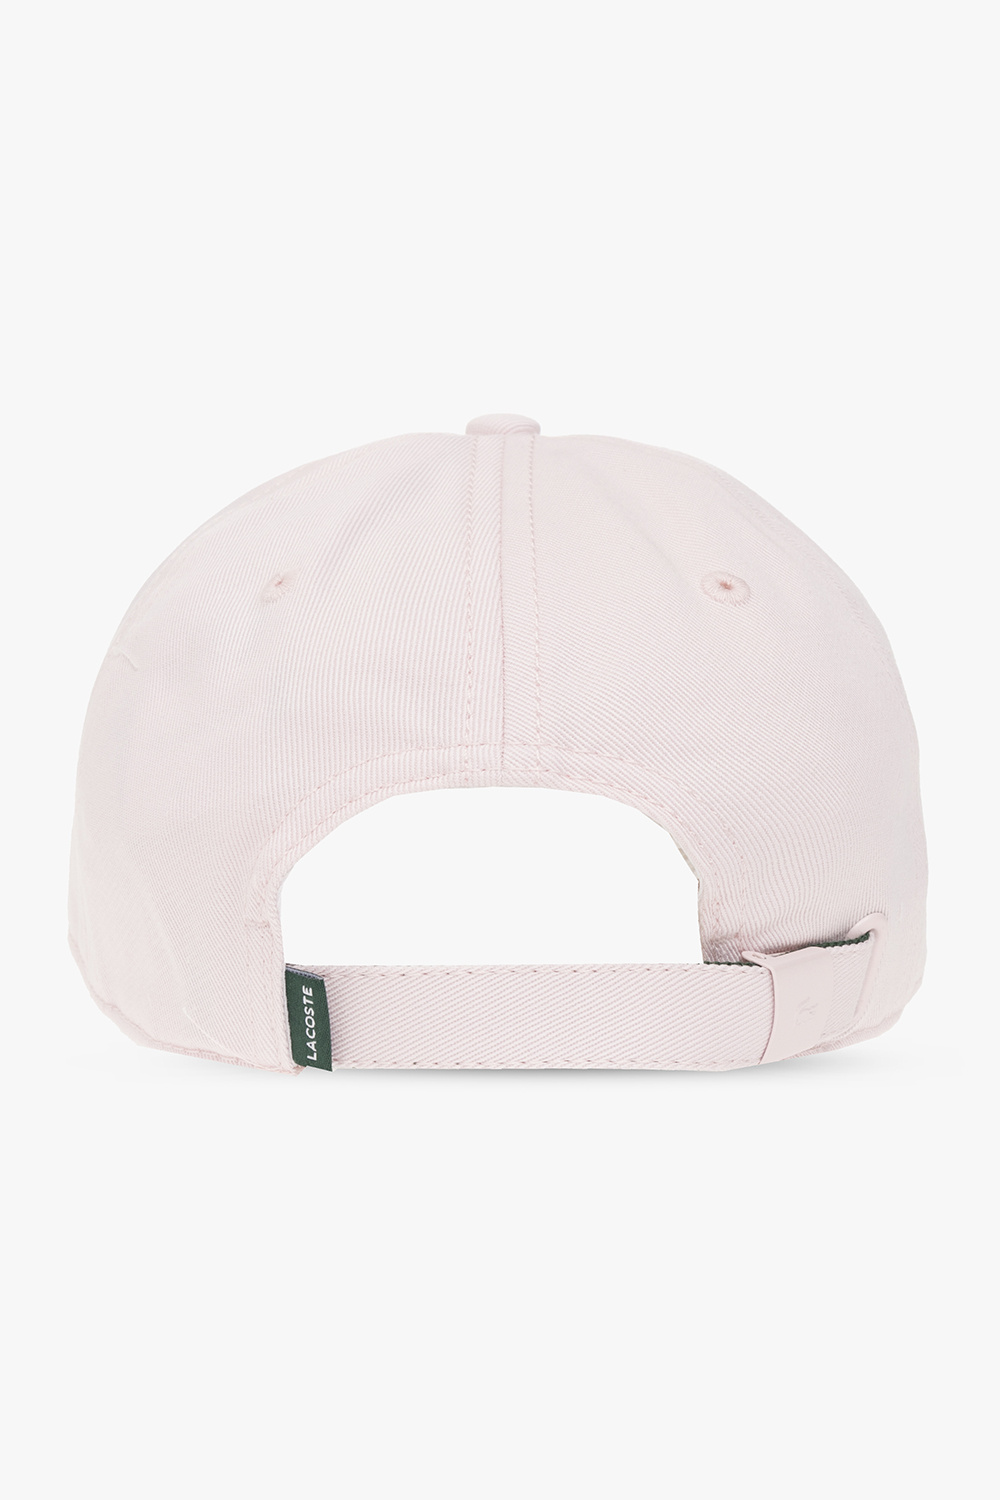 IetpShops Japan - collaborated logo with with atmos a Pink Serve new Lacoste collection and Cap on Serve - Lacoste